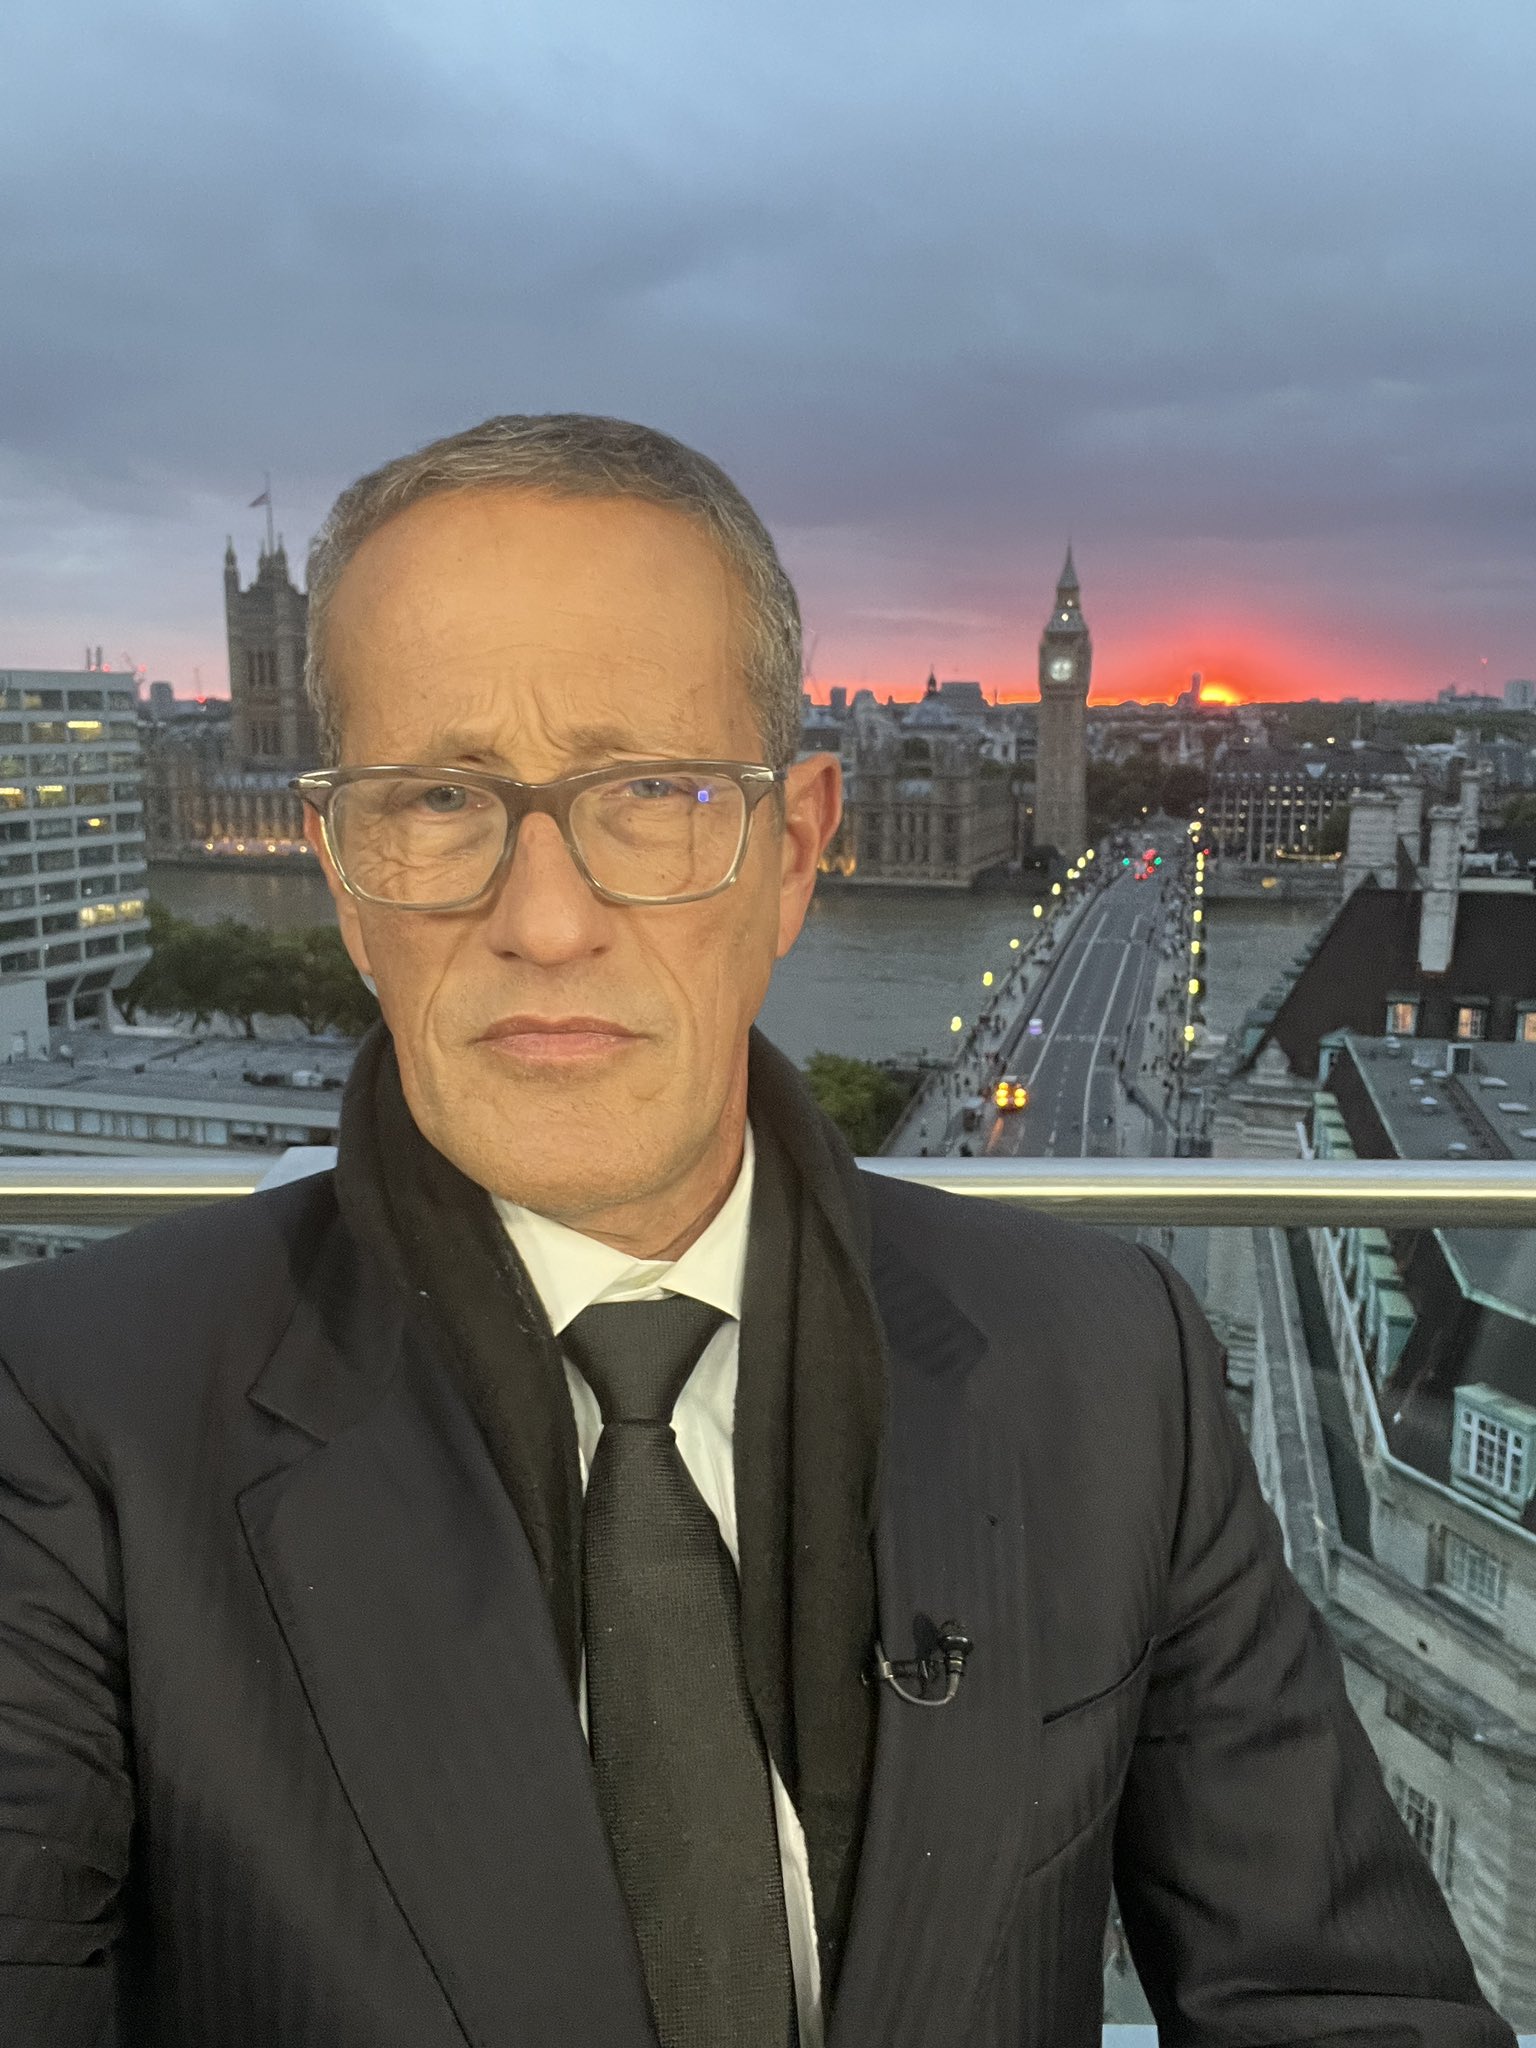 Welcome to SA: CNN’s Richard Quest hit by load shedding